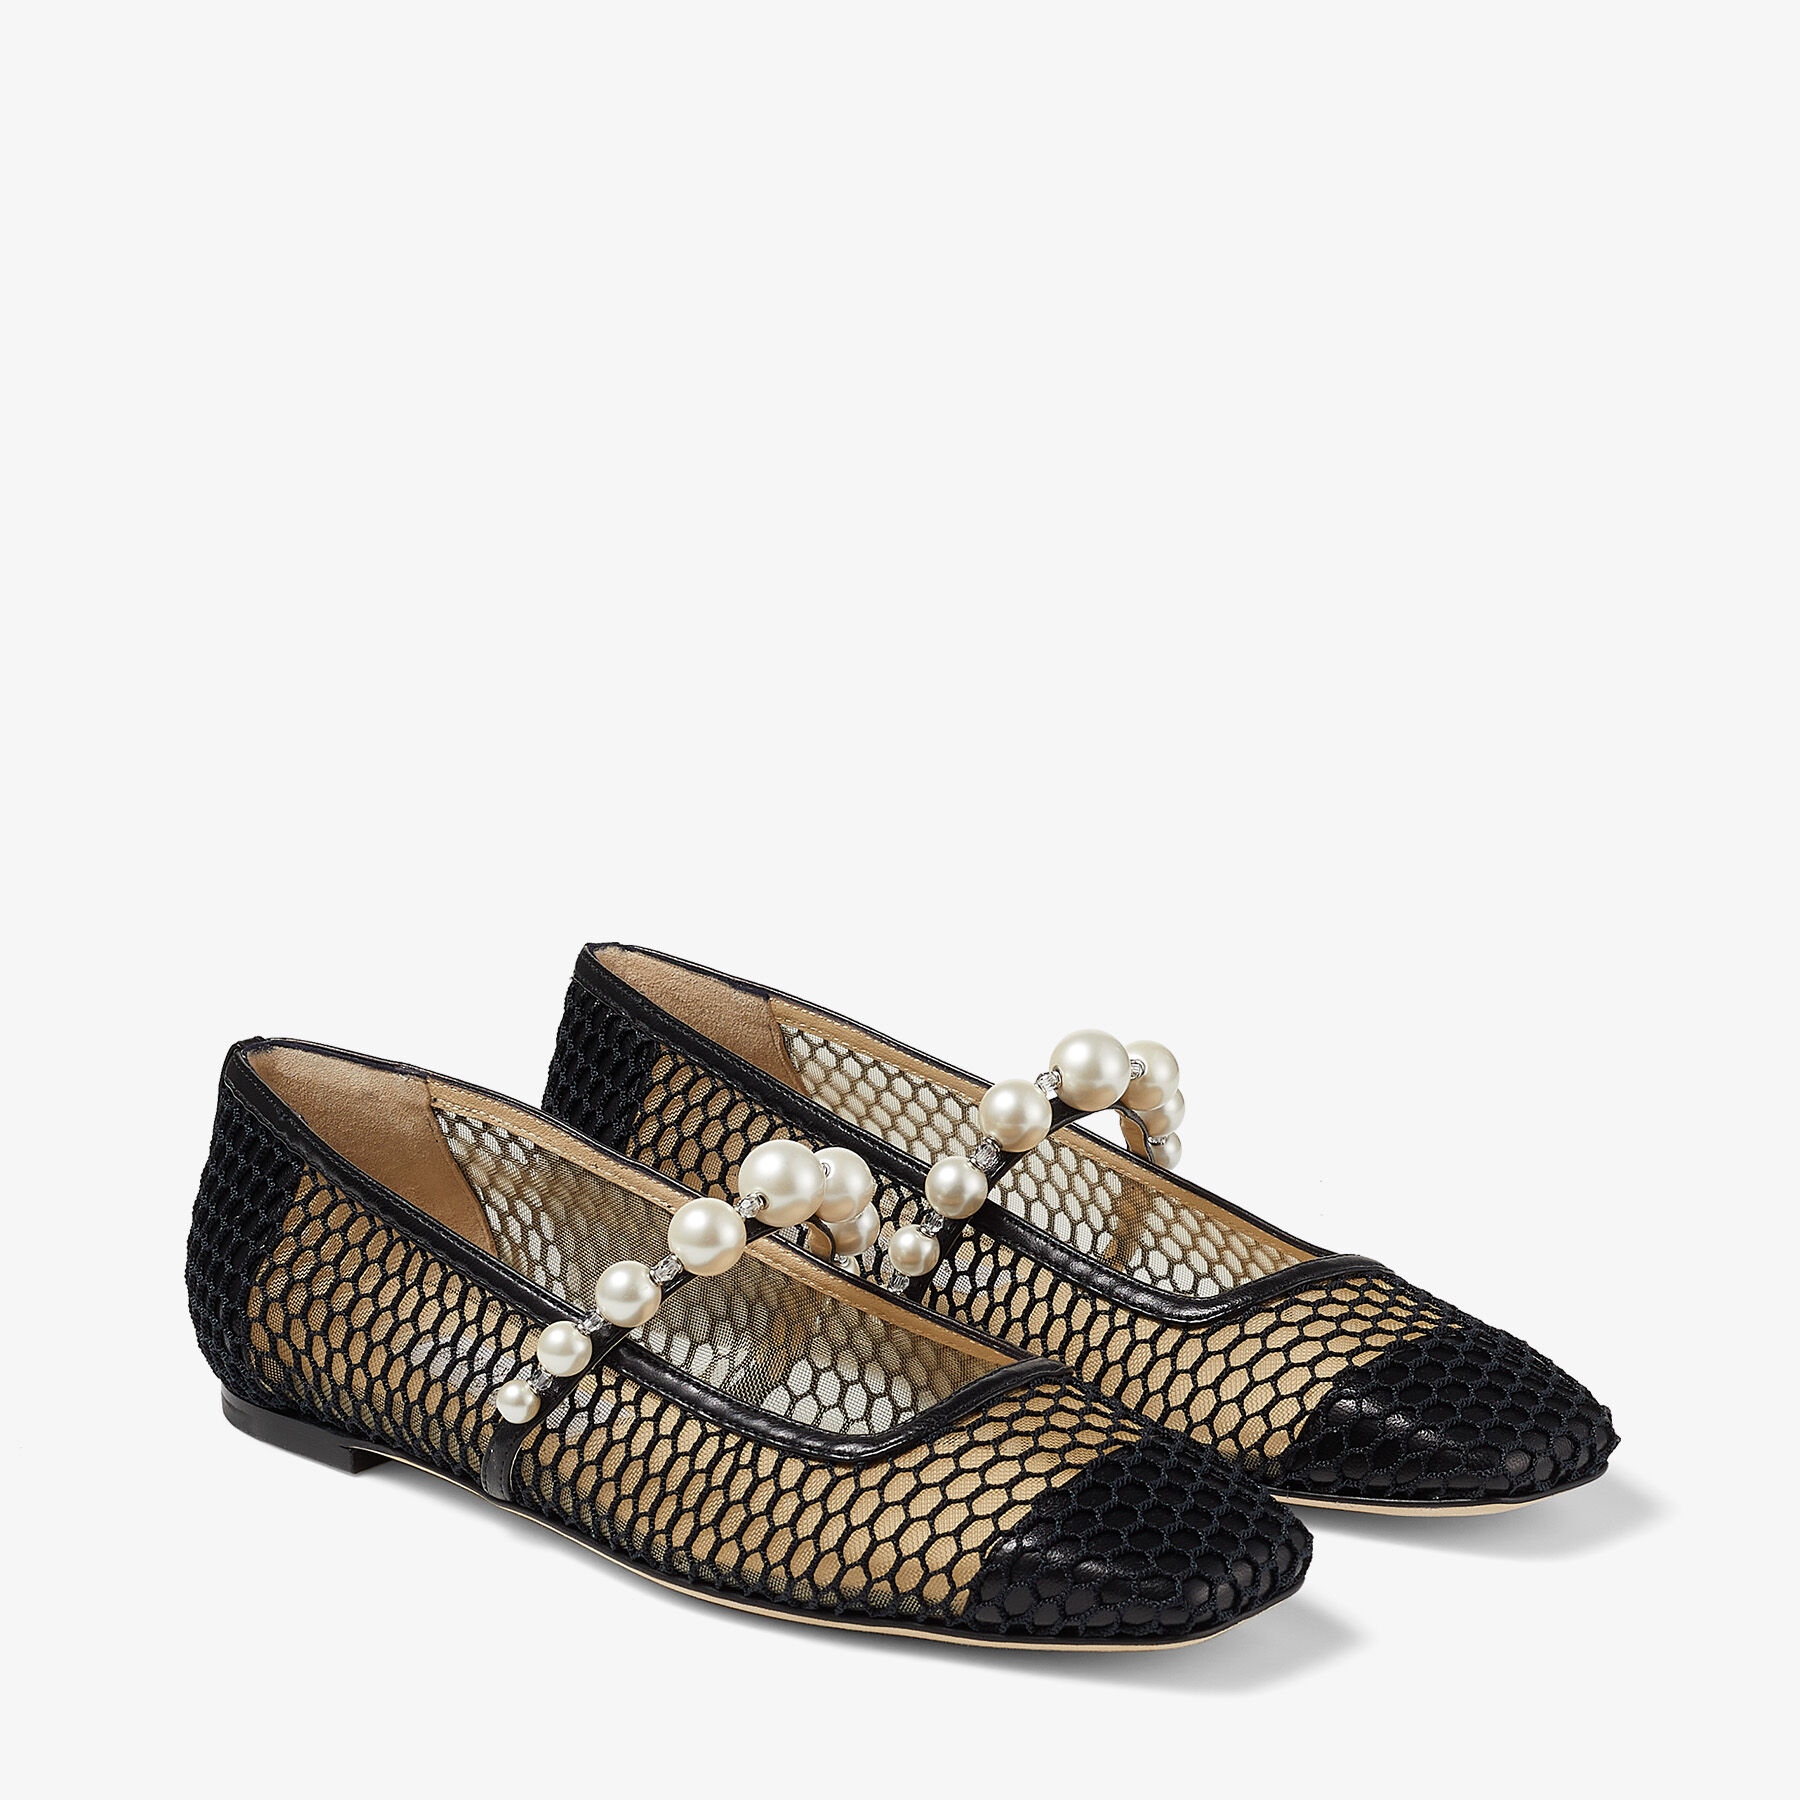 Black Fishnet Mesh and Nappa Flats with Pearl-Embellished Strap 